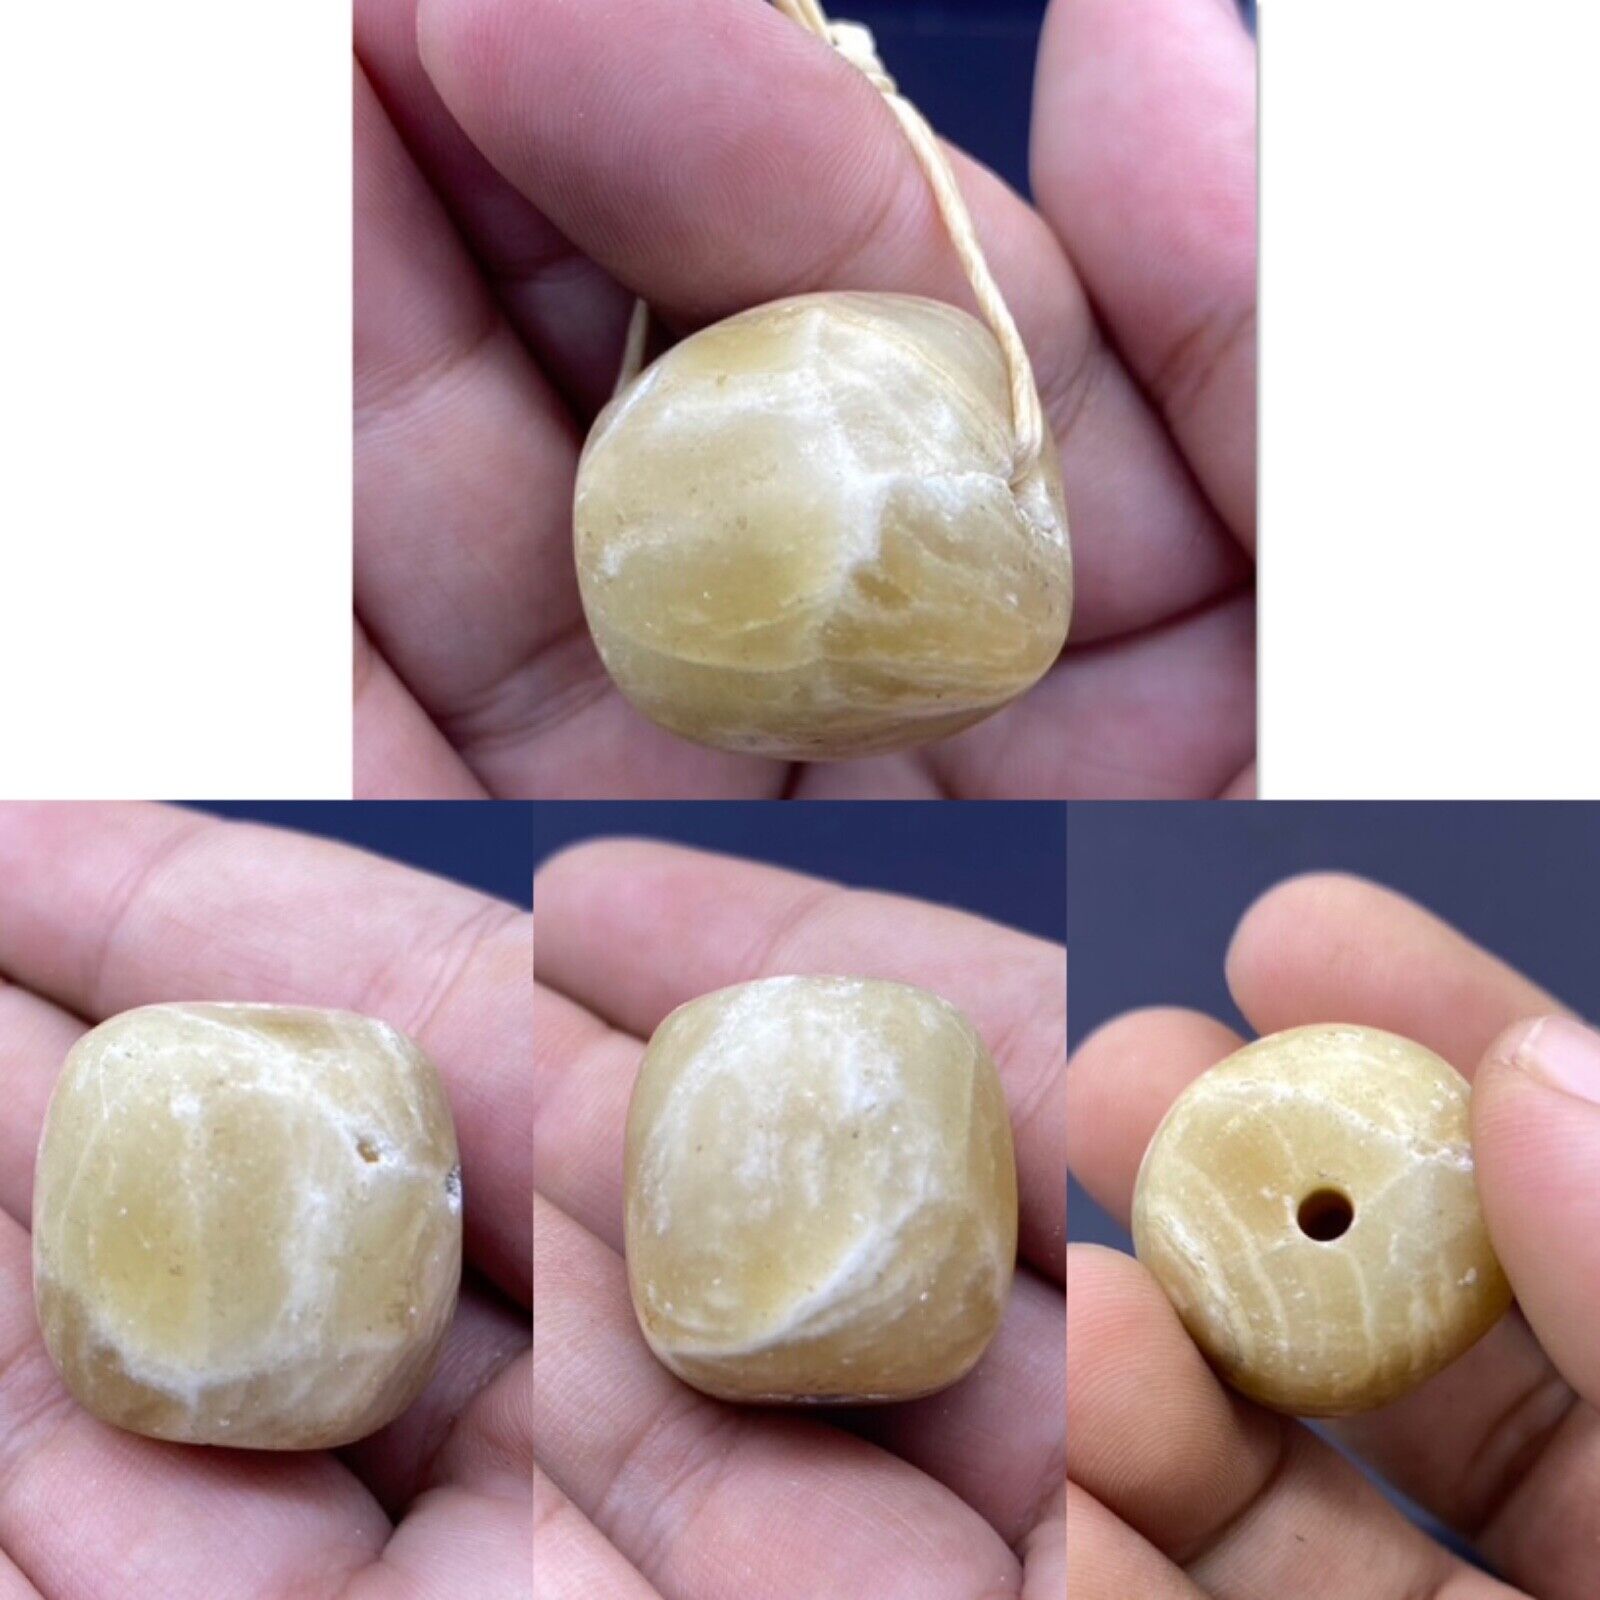 Very Authentic Old Natural Alabaster Stone Bactrian Beads Over 1000 Years Old